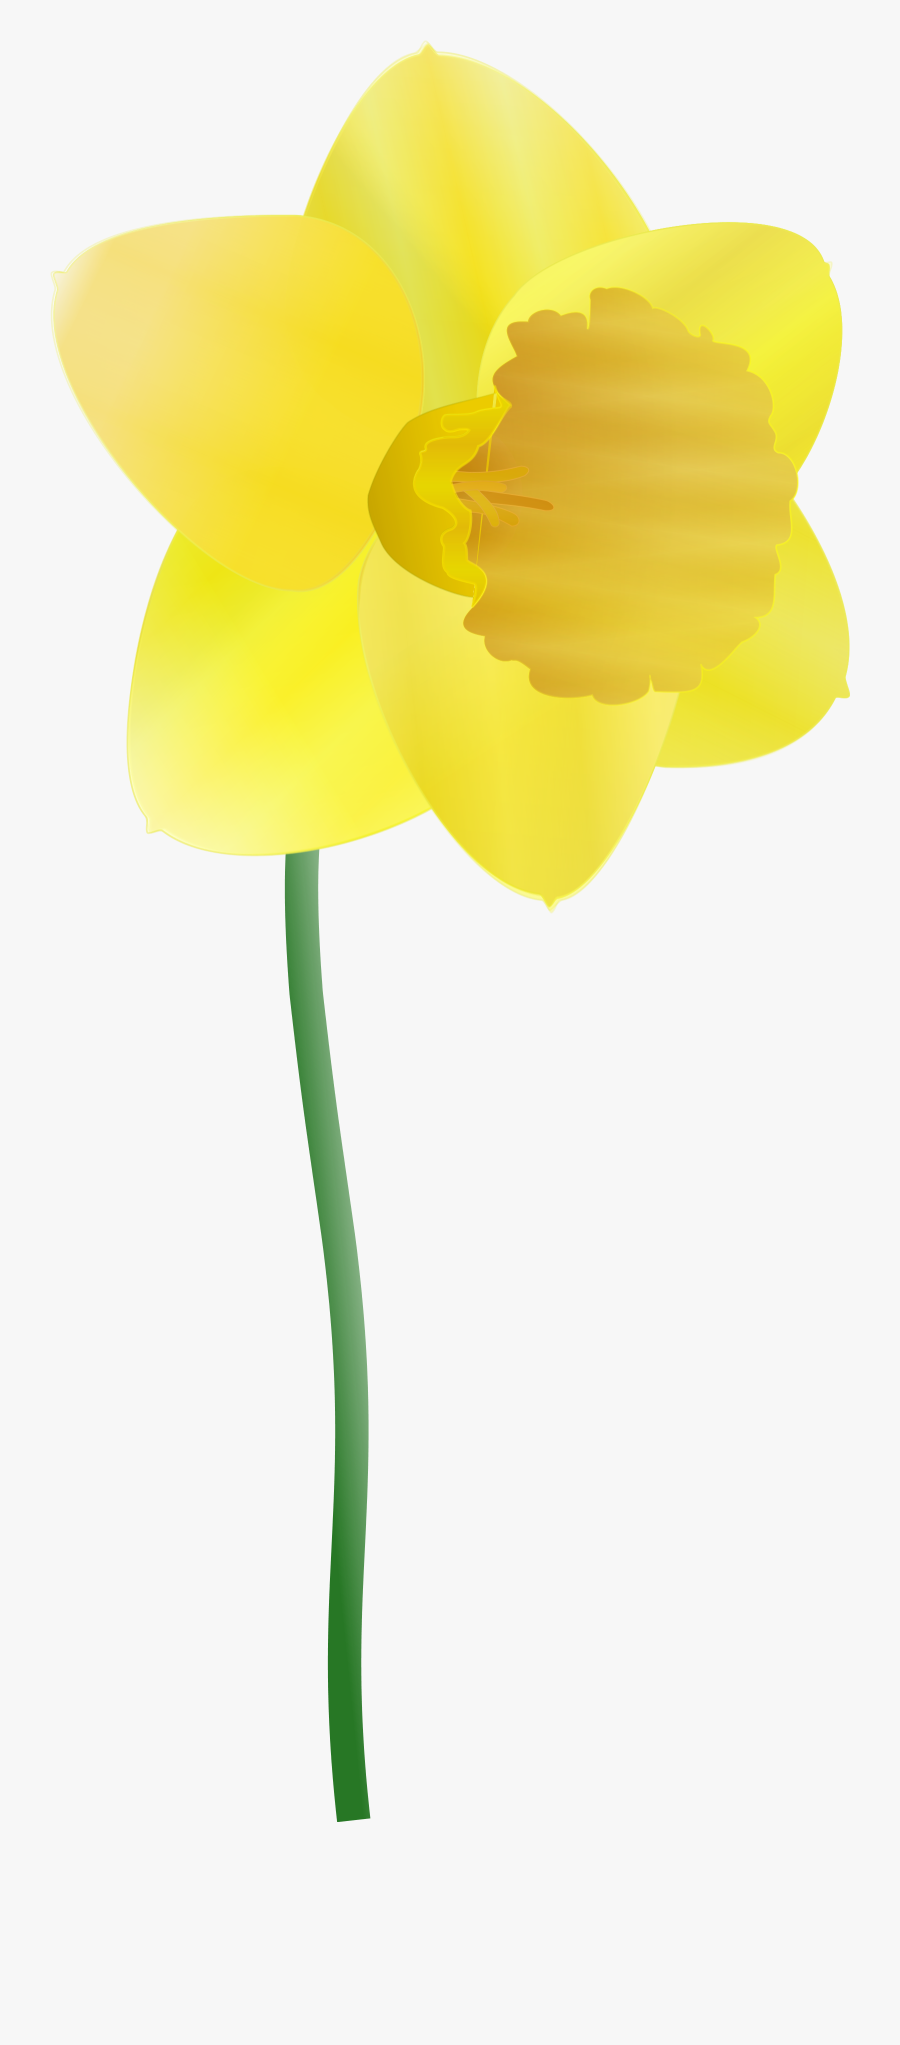 Daffodil Yellow Flower Spring Png Image - Cartoon Daffodils, Transparent Clipart